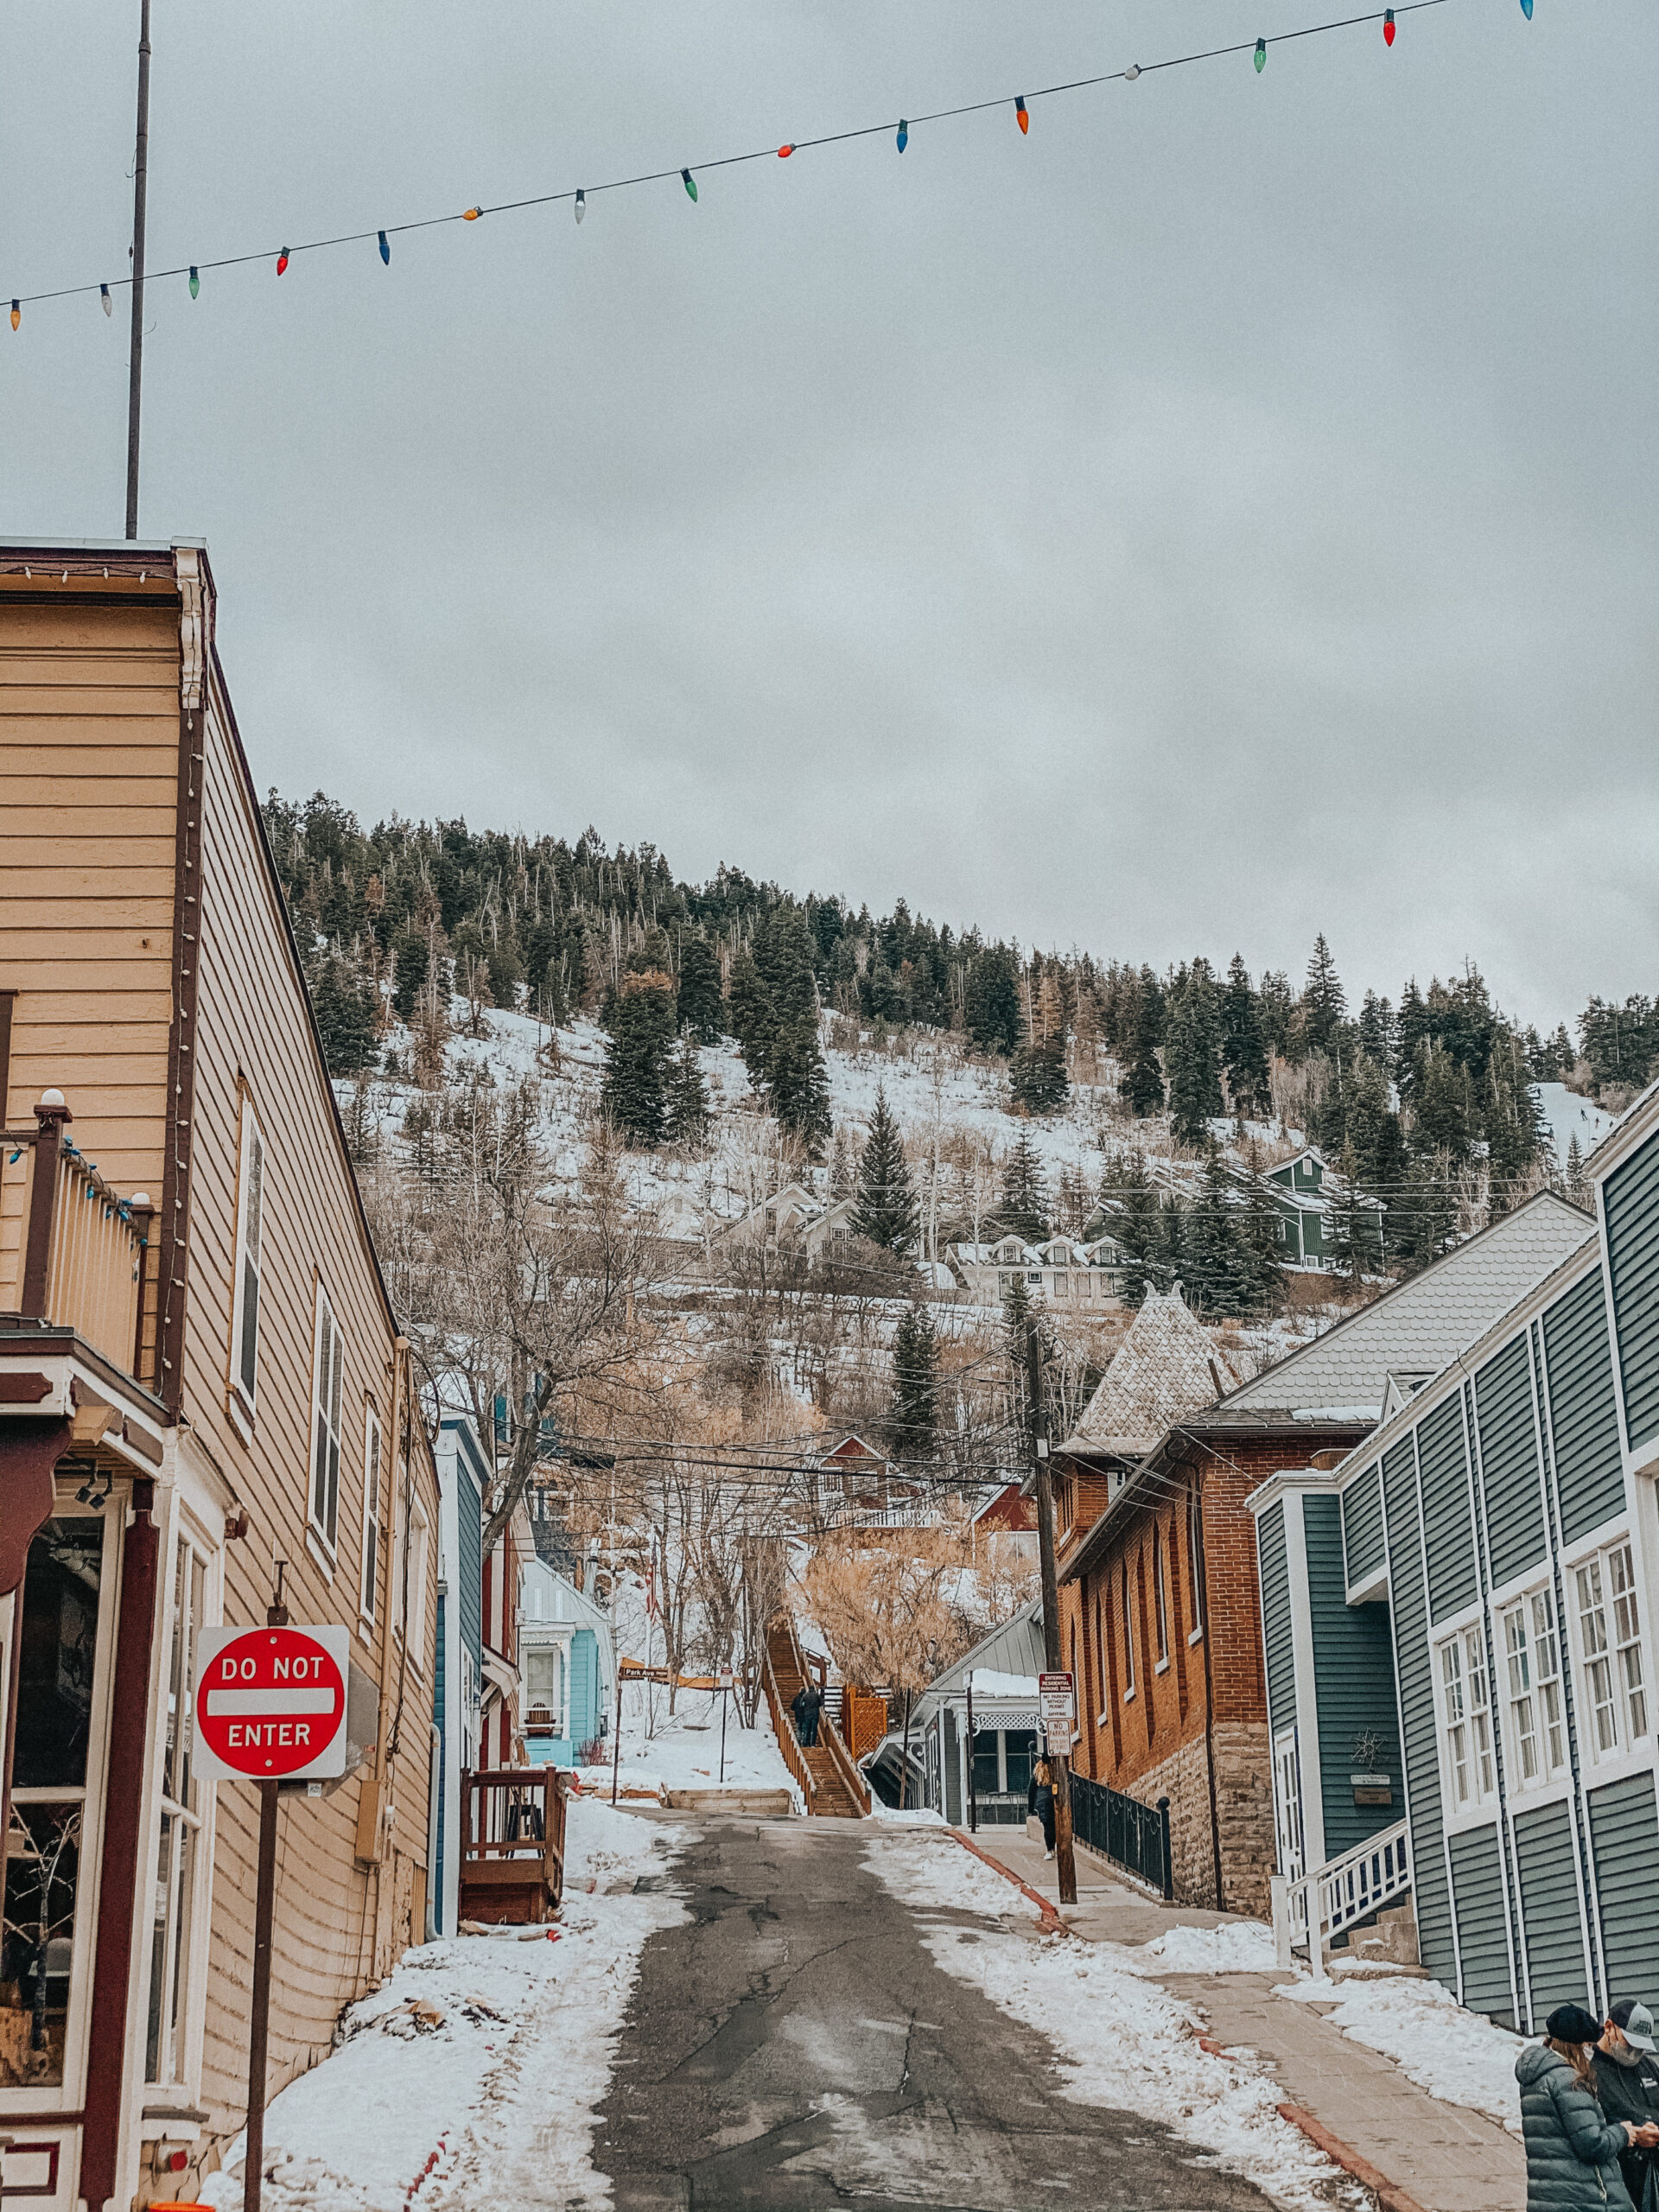 How to spend 1 week in Park City, Utah: Park City Travel Guide